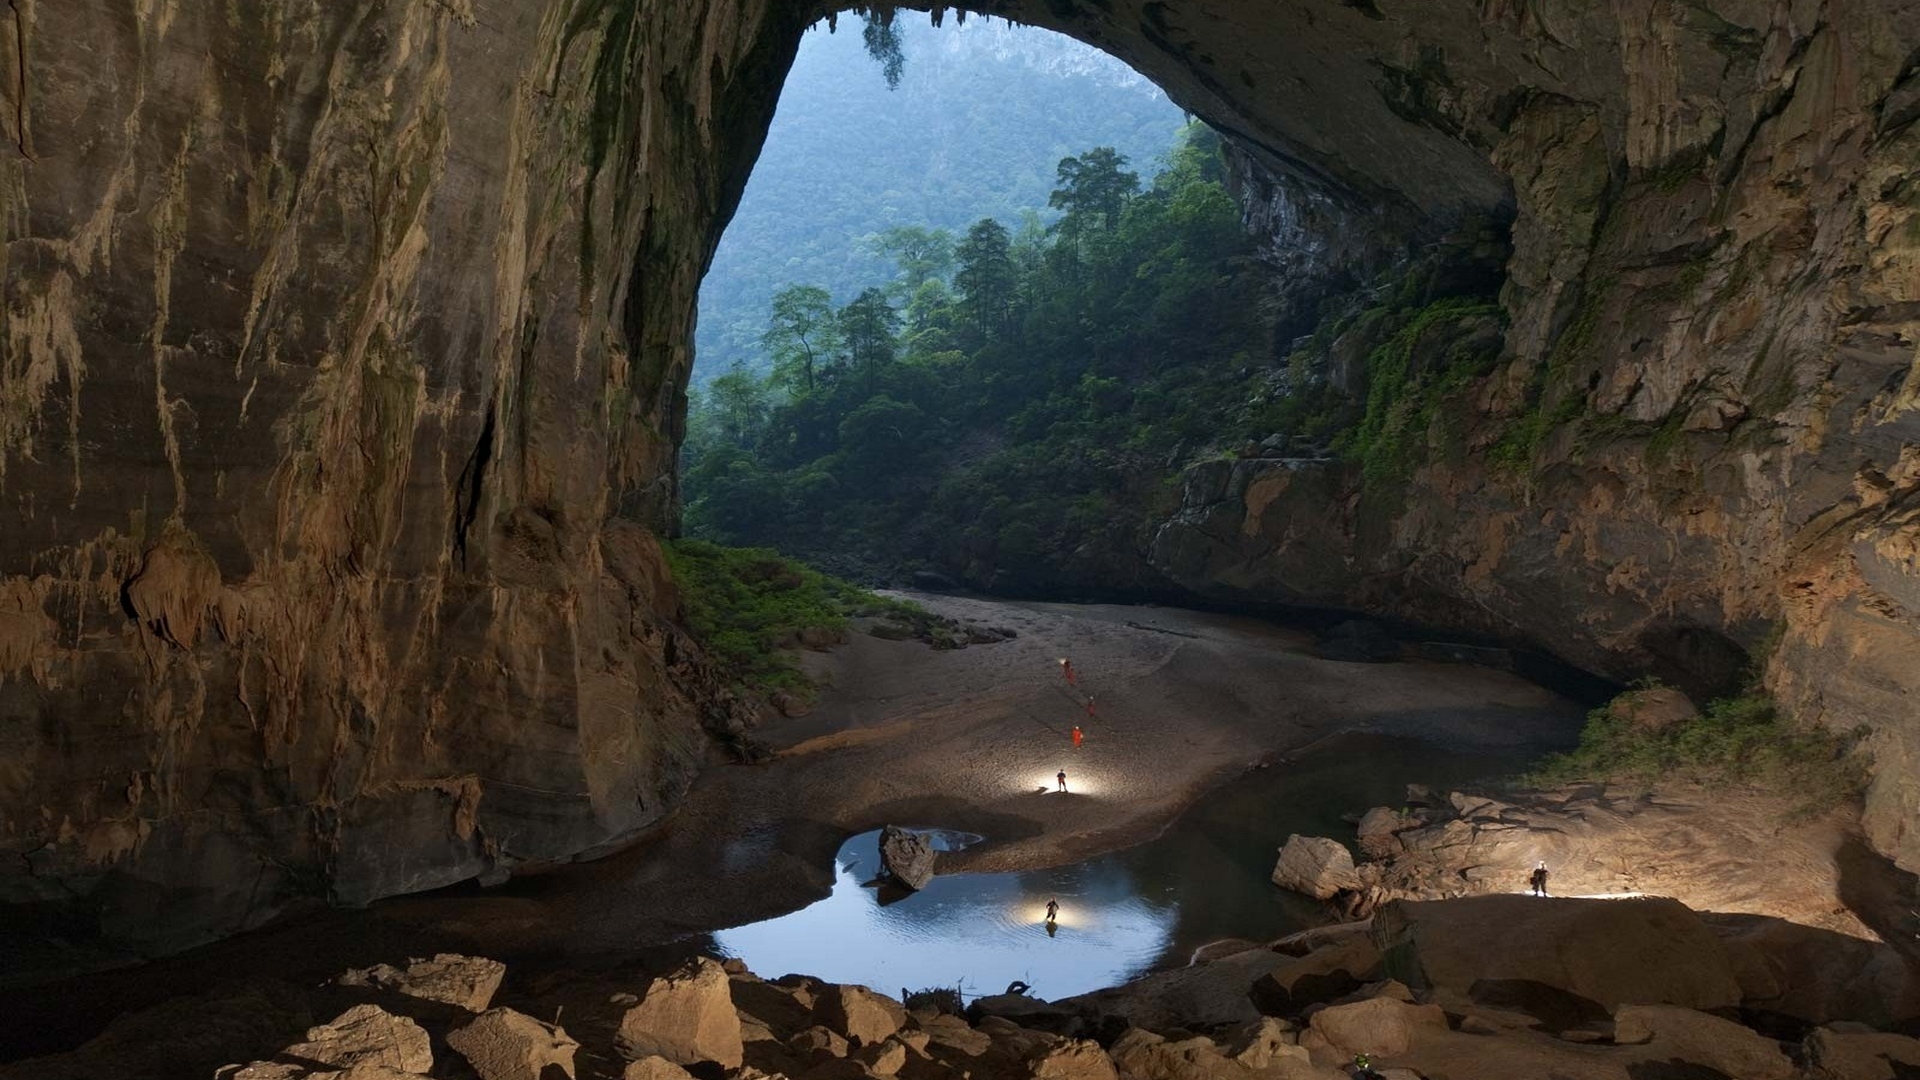 6 Son Doong Cave HD Wallpapers | Backgrounds - Wallpaper Abyss